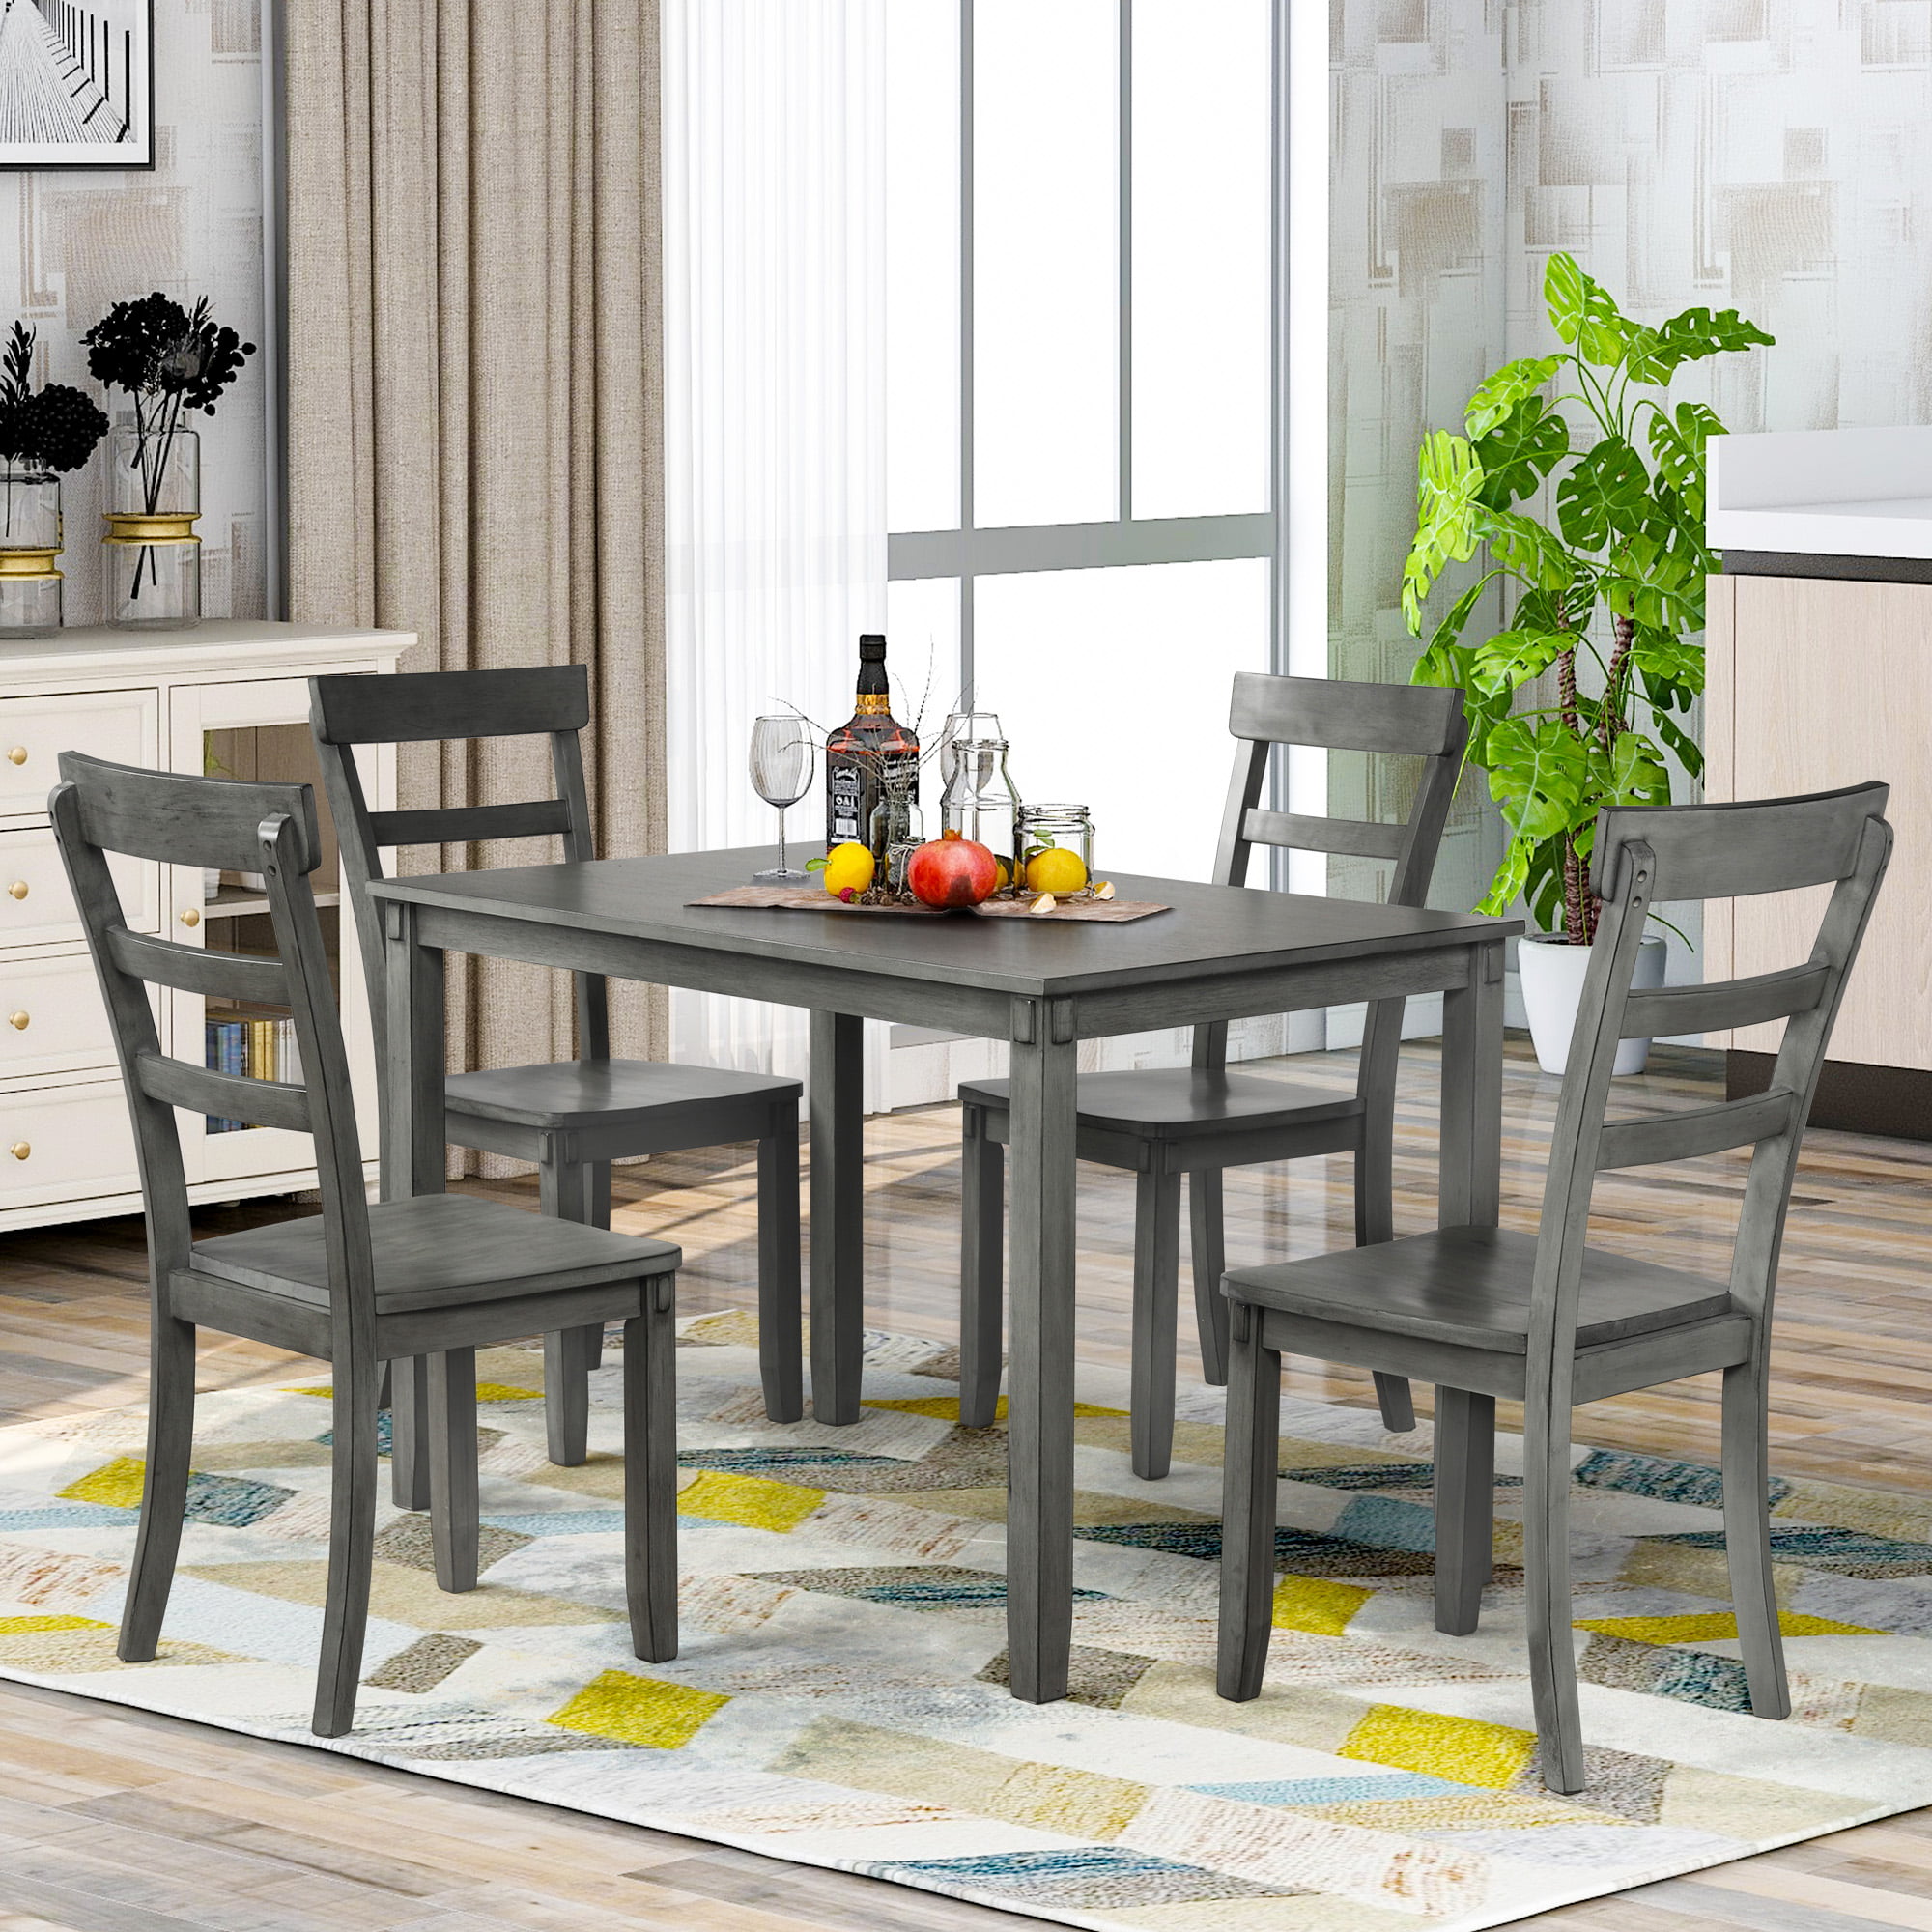 Rectangle Dining Table and Chair Set, URHOMEPRO 5 Piece Kitchen Dinette